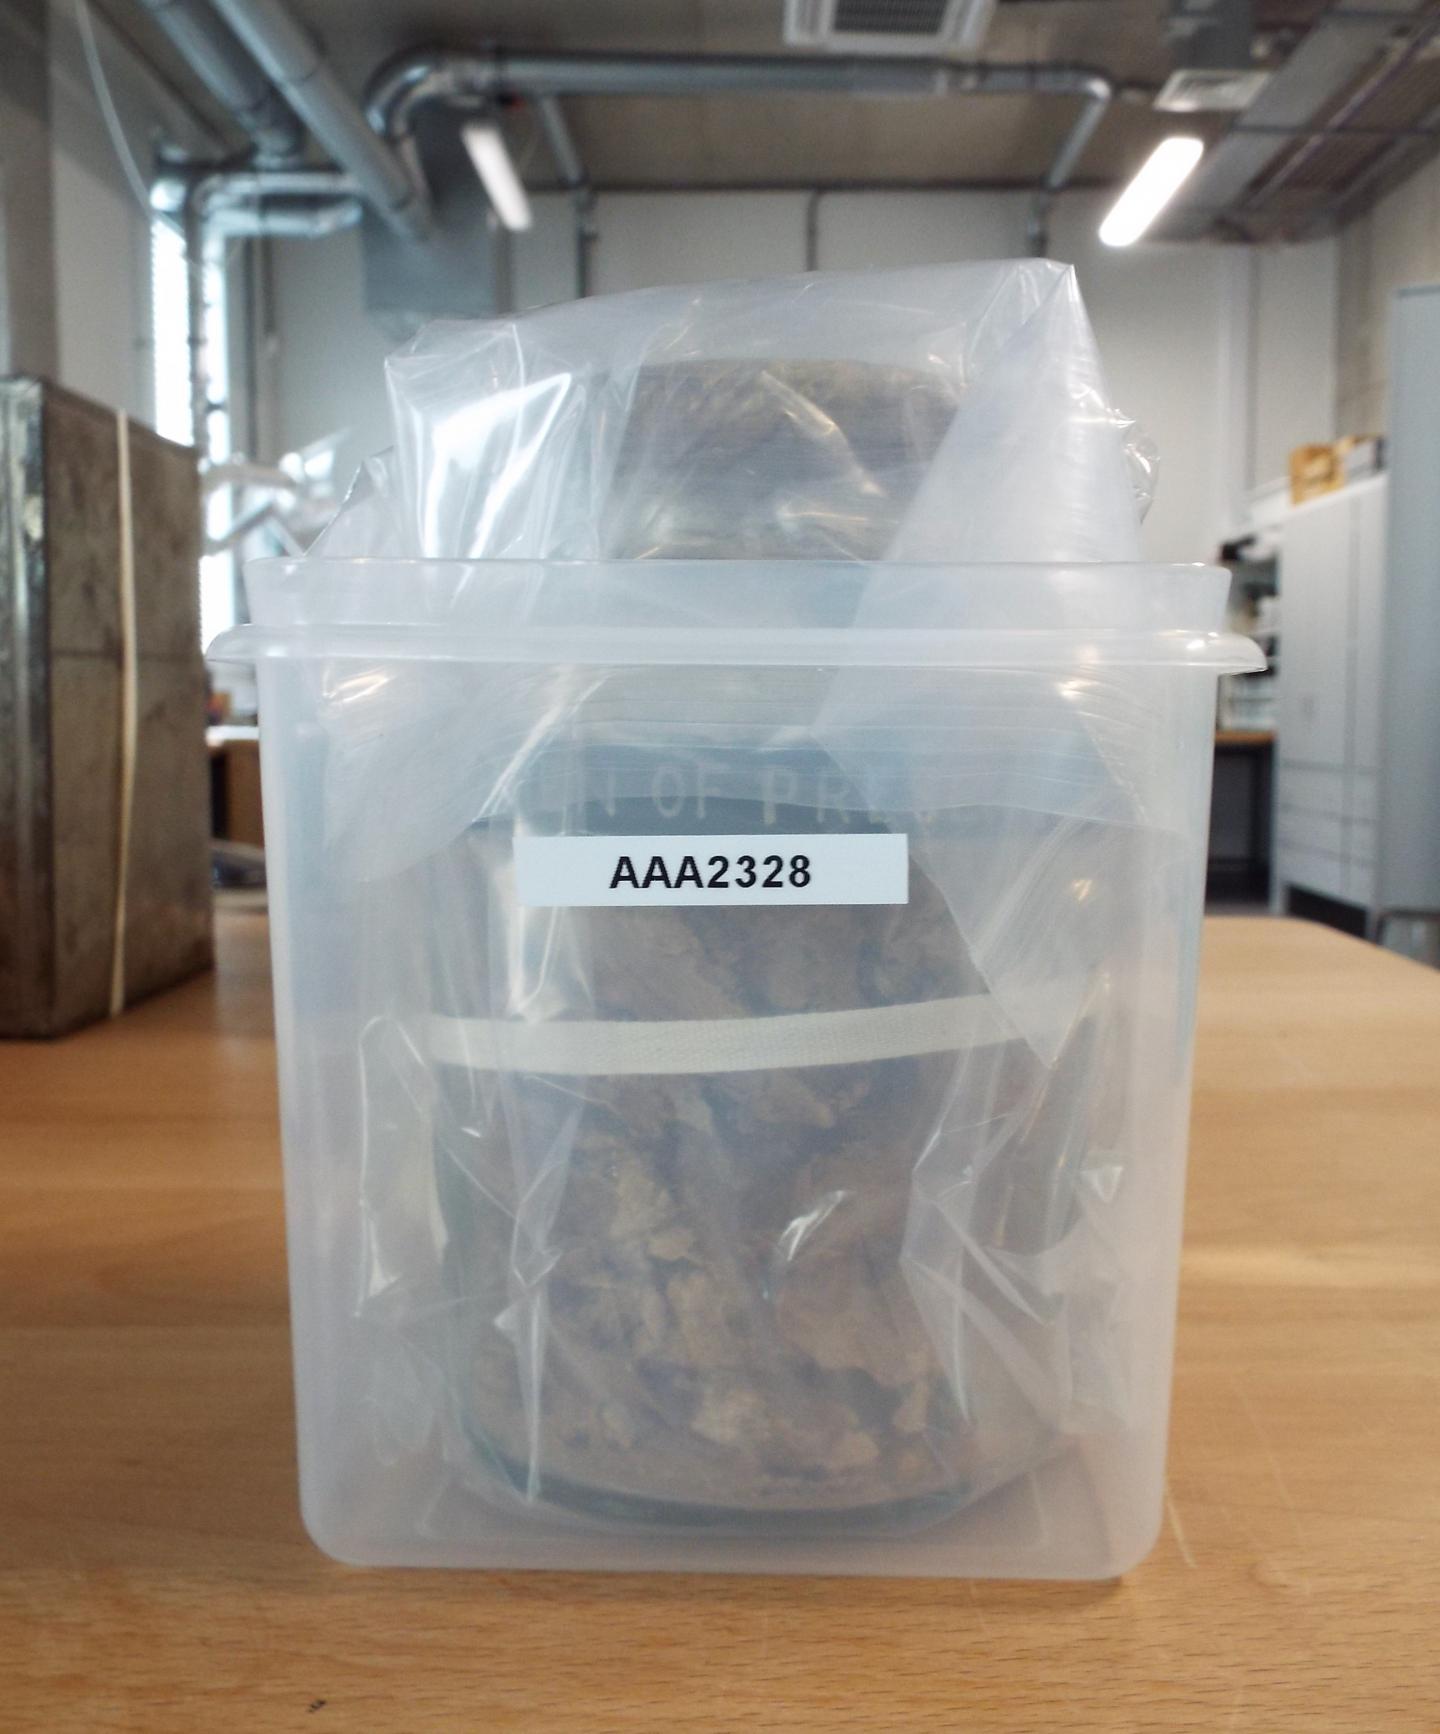 Jar of preserved meat sealed in a bag and in its new box.